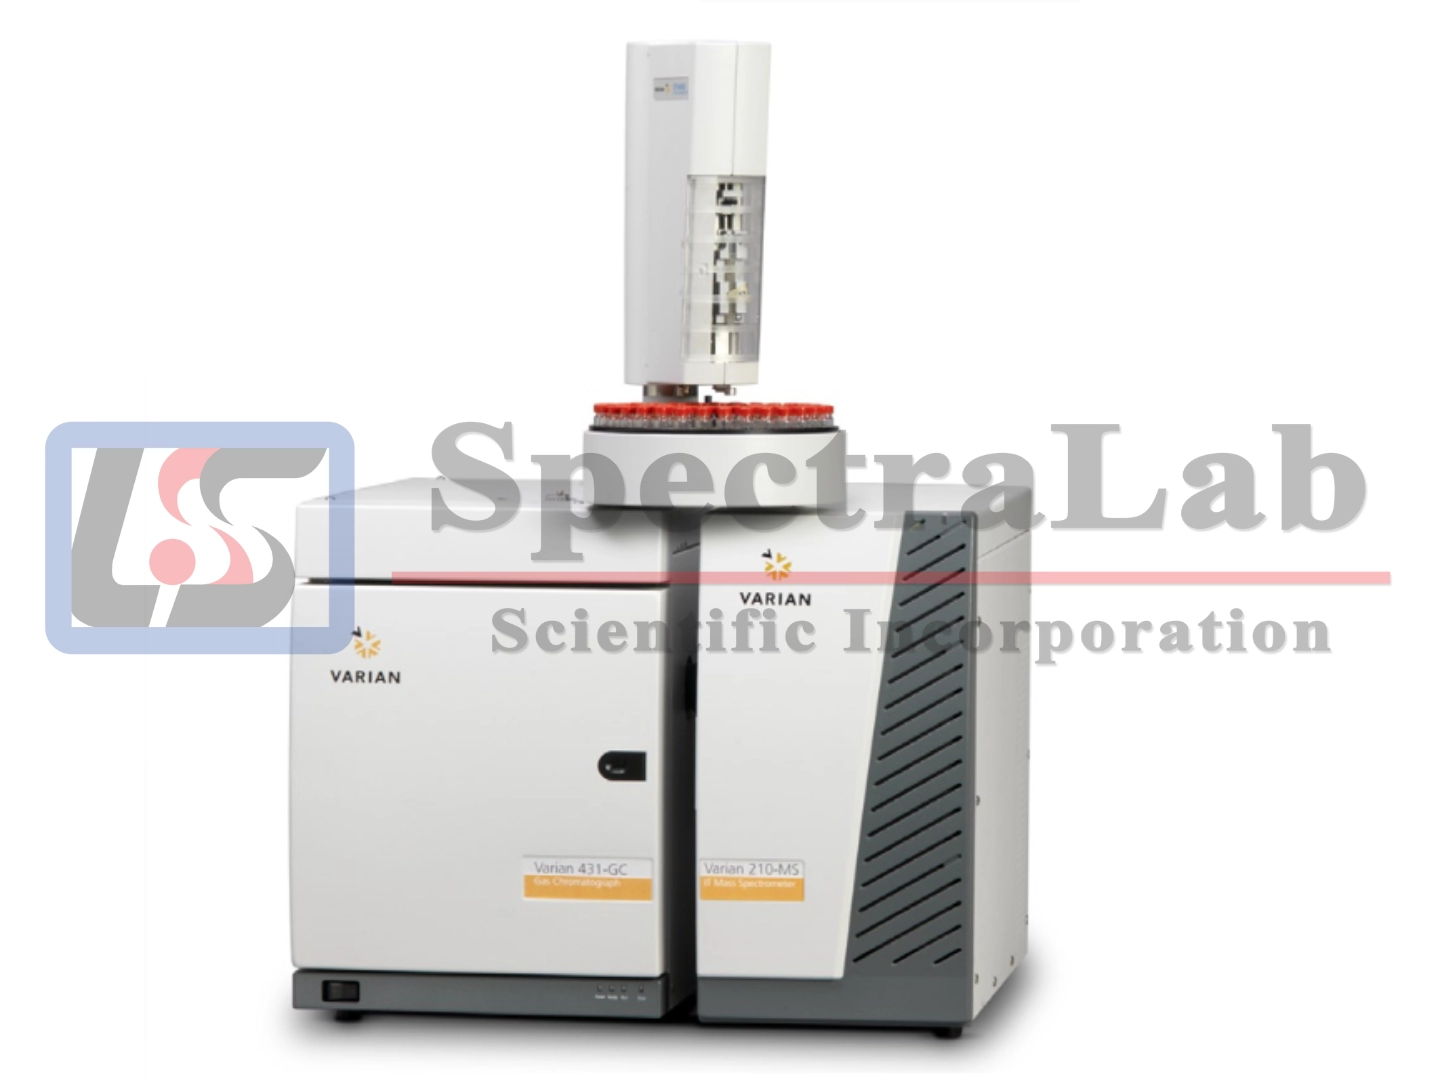 Varian 210-MS with 431-GC and CP-8400 Autosampler